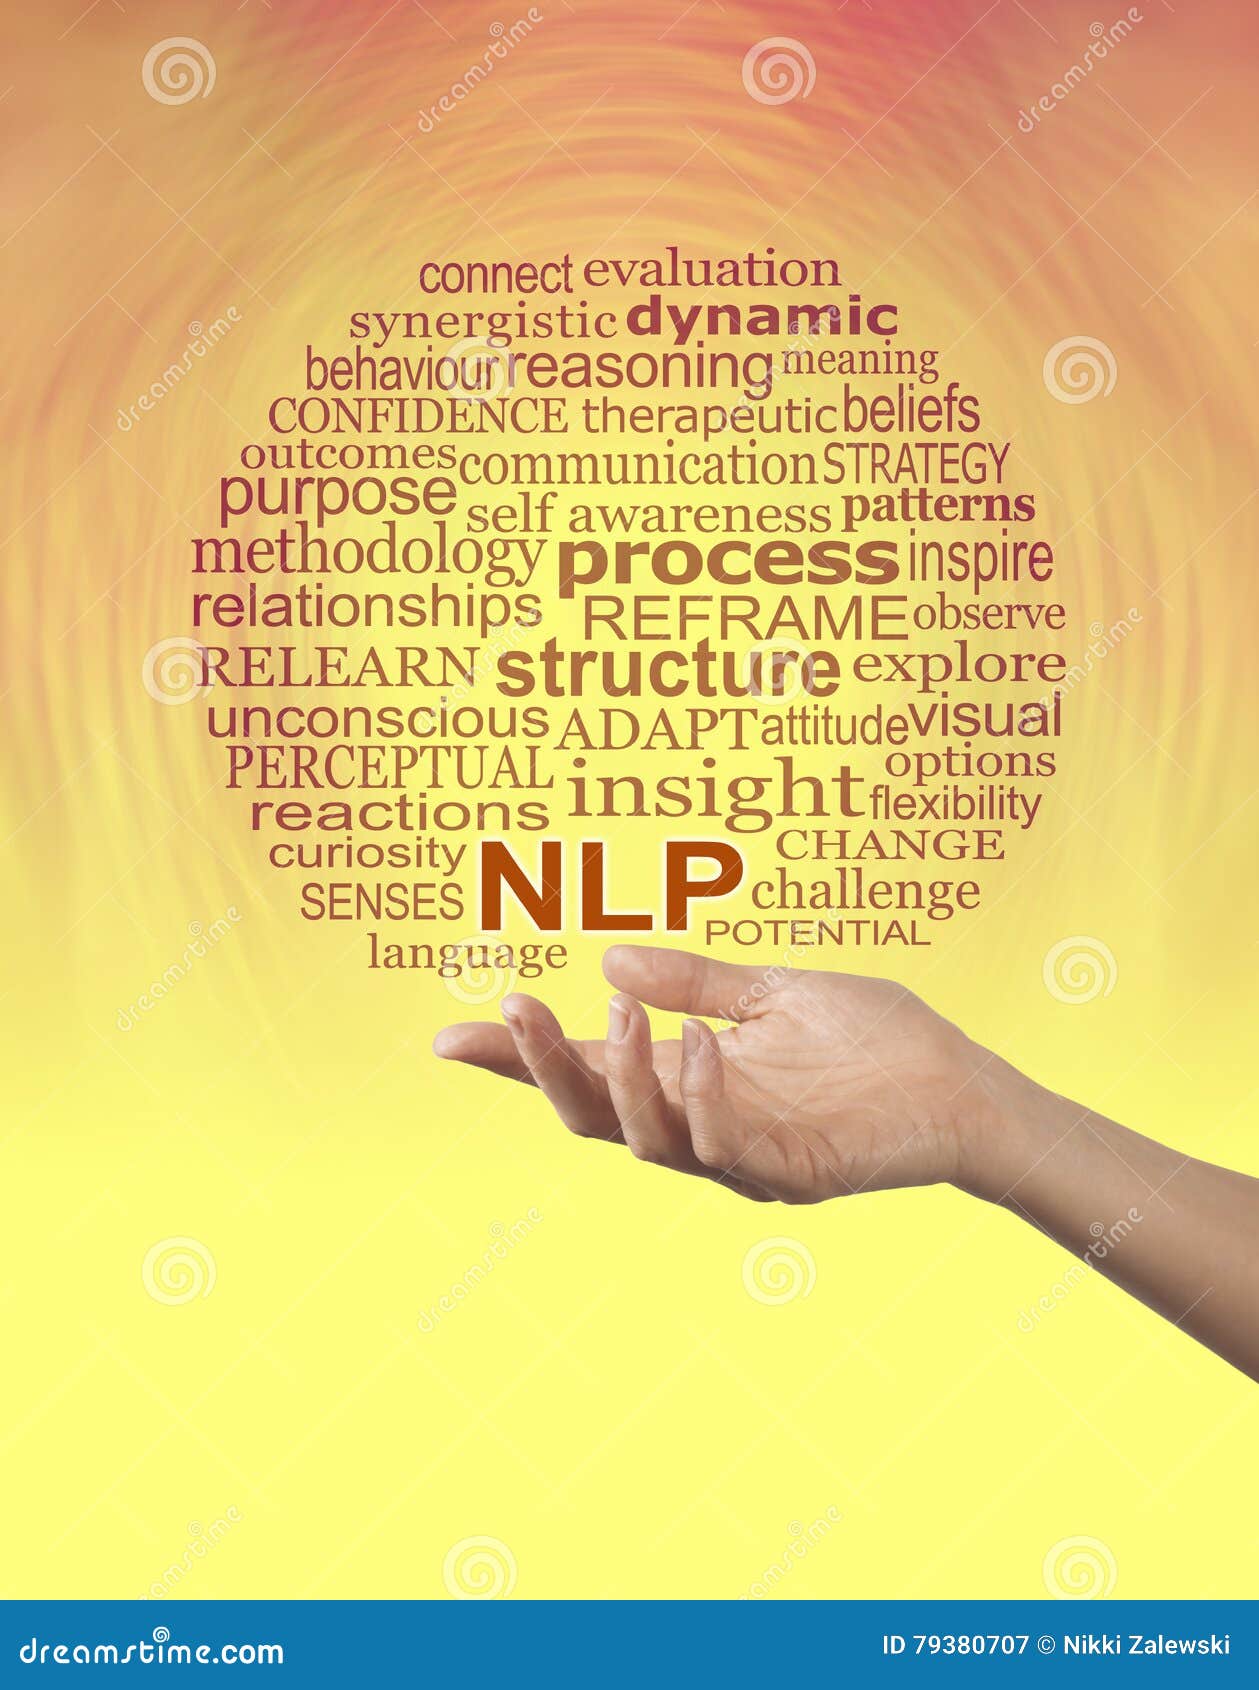 aspects of neuro linguistic programming nlp word cloud -